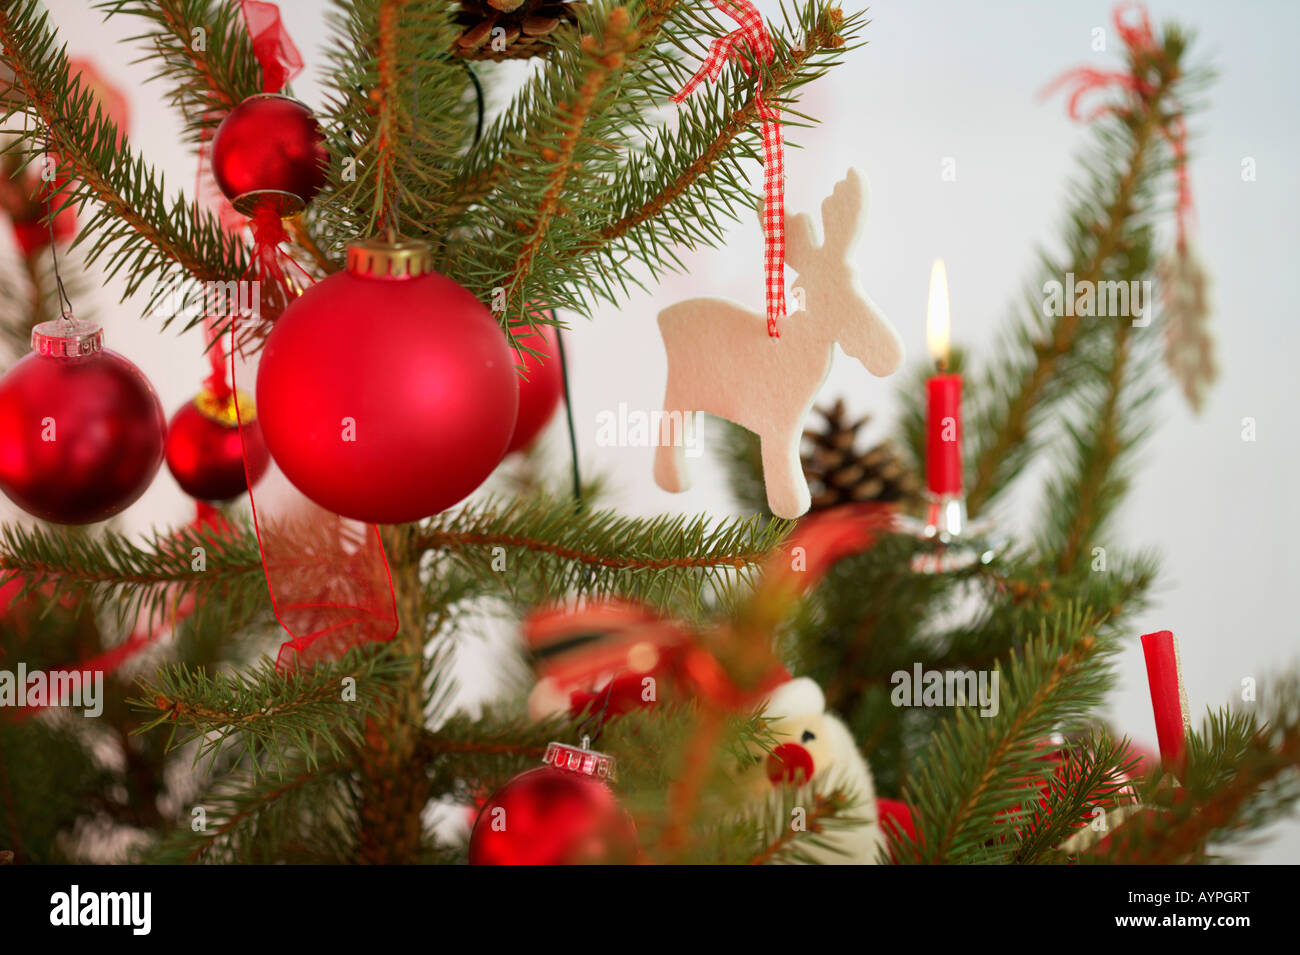 Decorated Christmas tree, part of Stock Photo